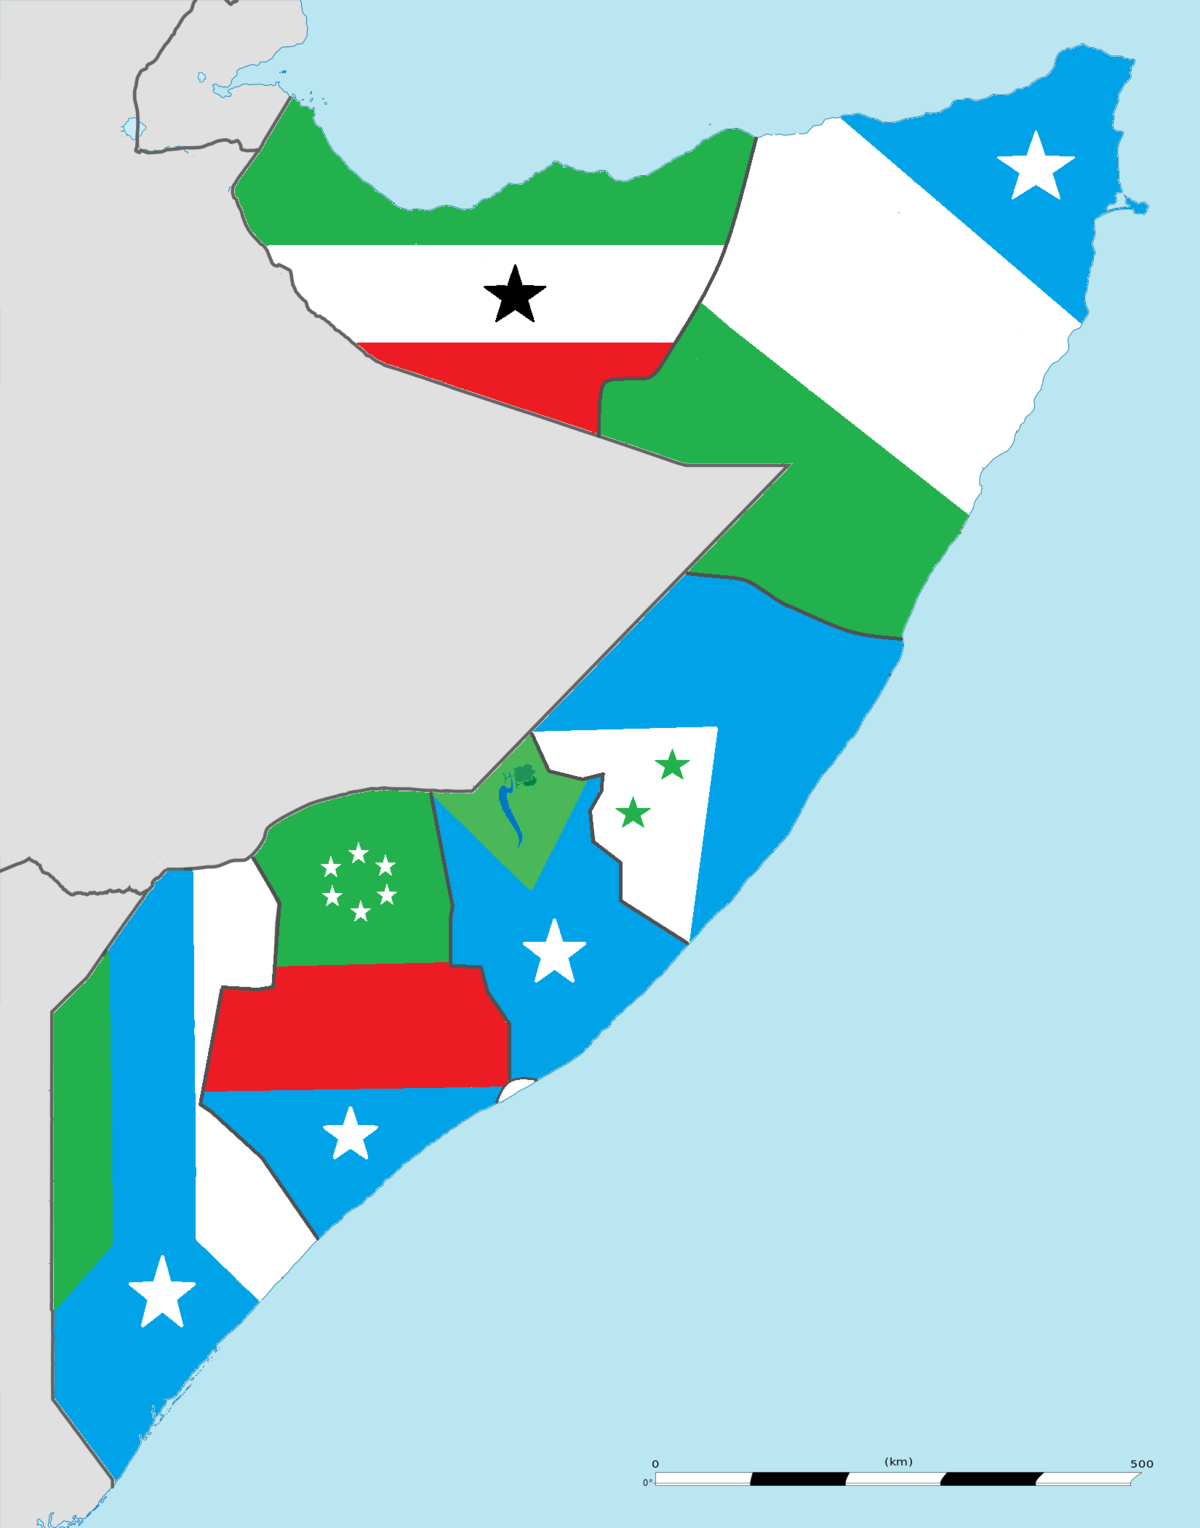 1200px-Somalia_federal_member_statets.png